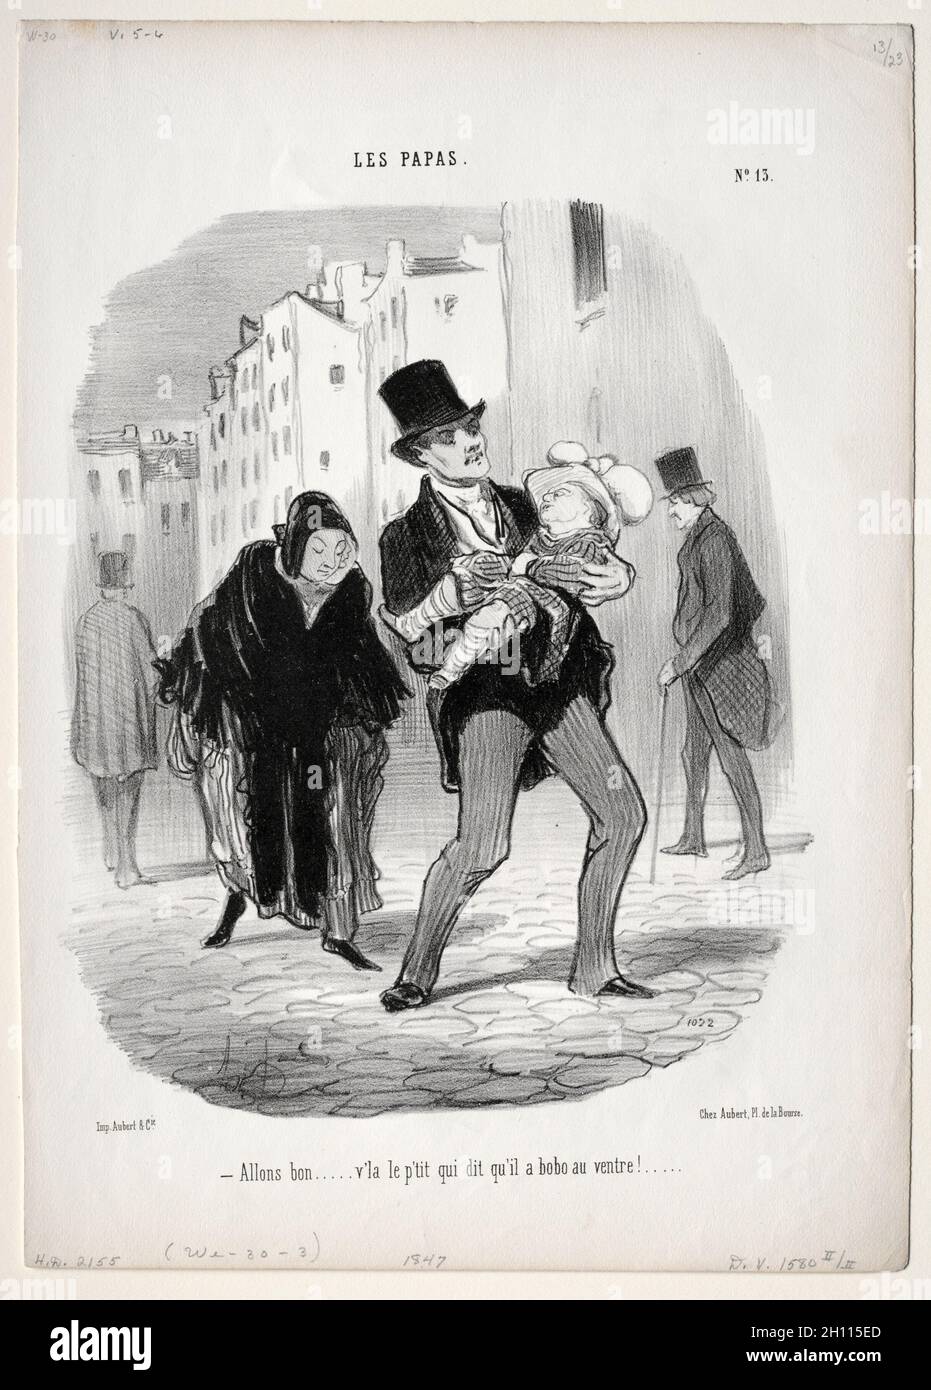 Fathers: Come along, dear..., 1847. Honoré Daumier (French, 1808-1879). Lithograph; sheet: 35.8 x 25.4 cm (14 1/8 x 10 in.). Stock Photo